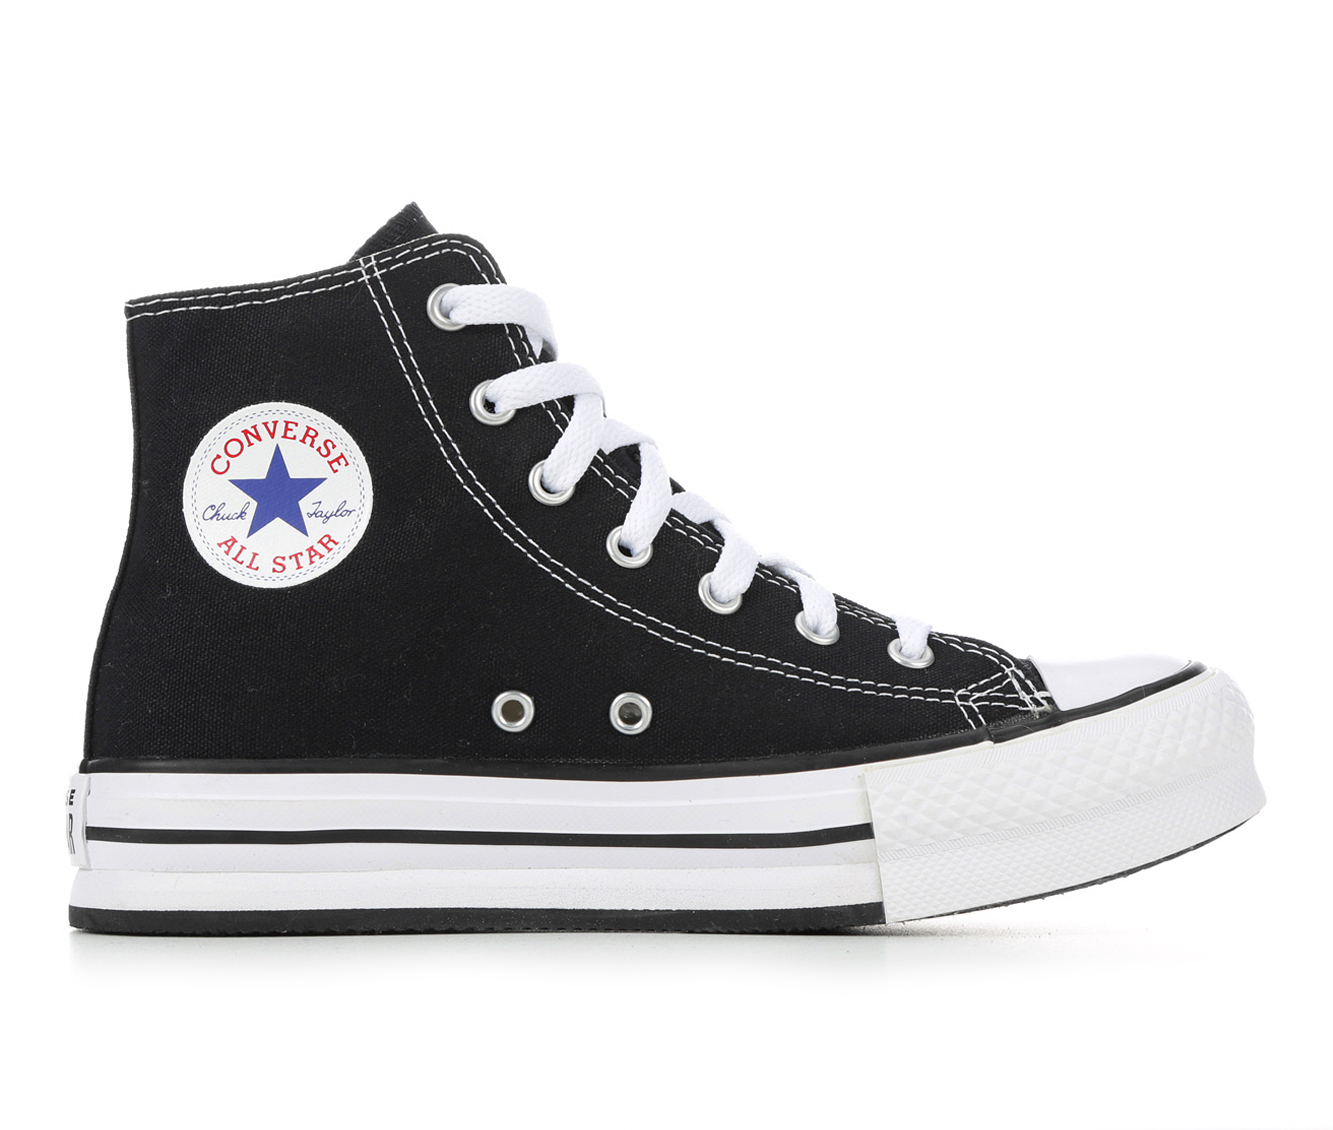 Converse Shoes | Carnival